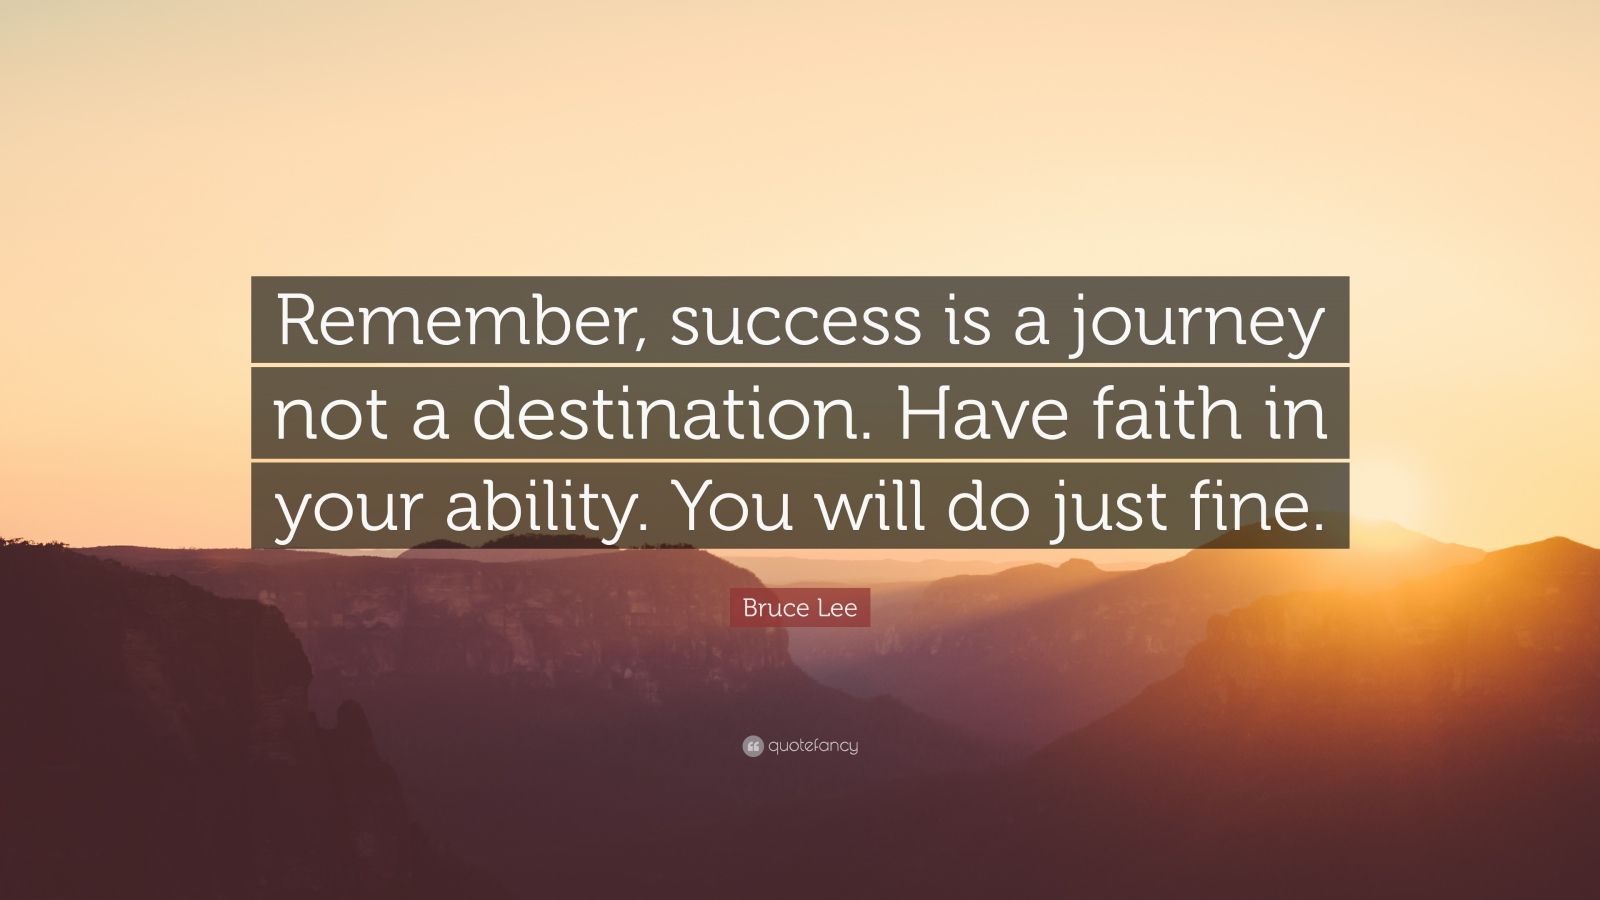 Bruce Lee Quote: “Remember, success is a journey not a destination